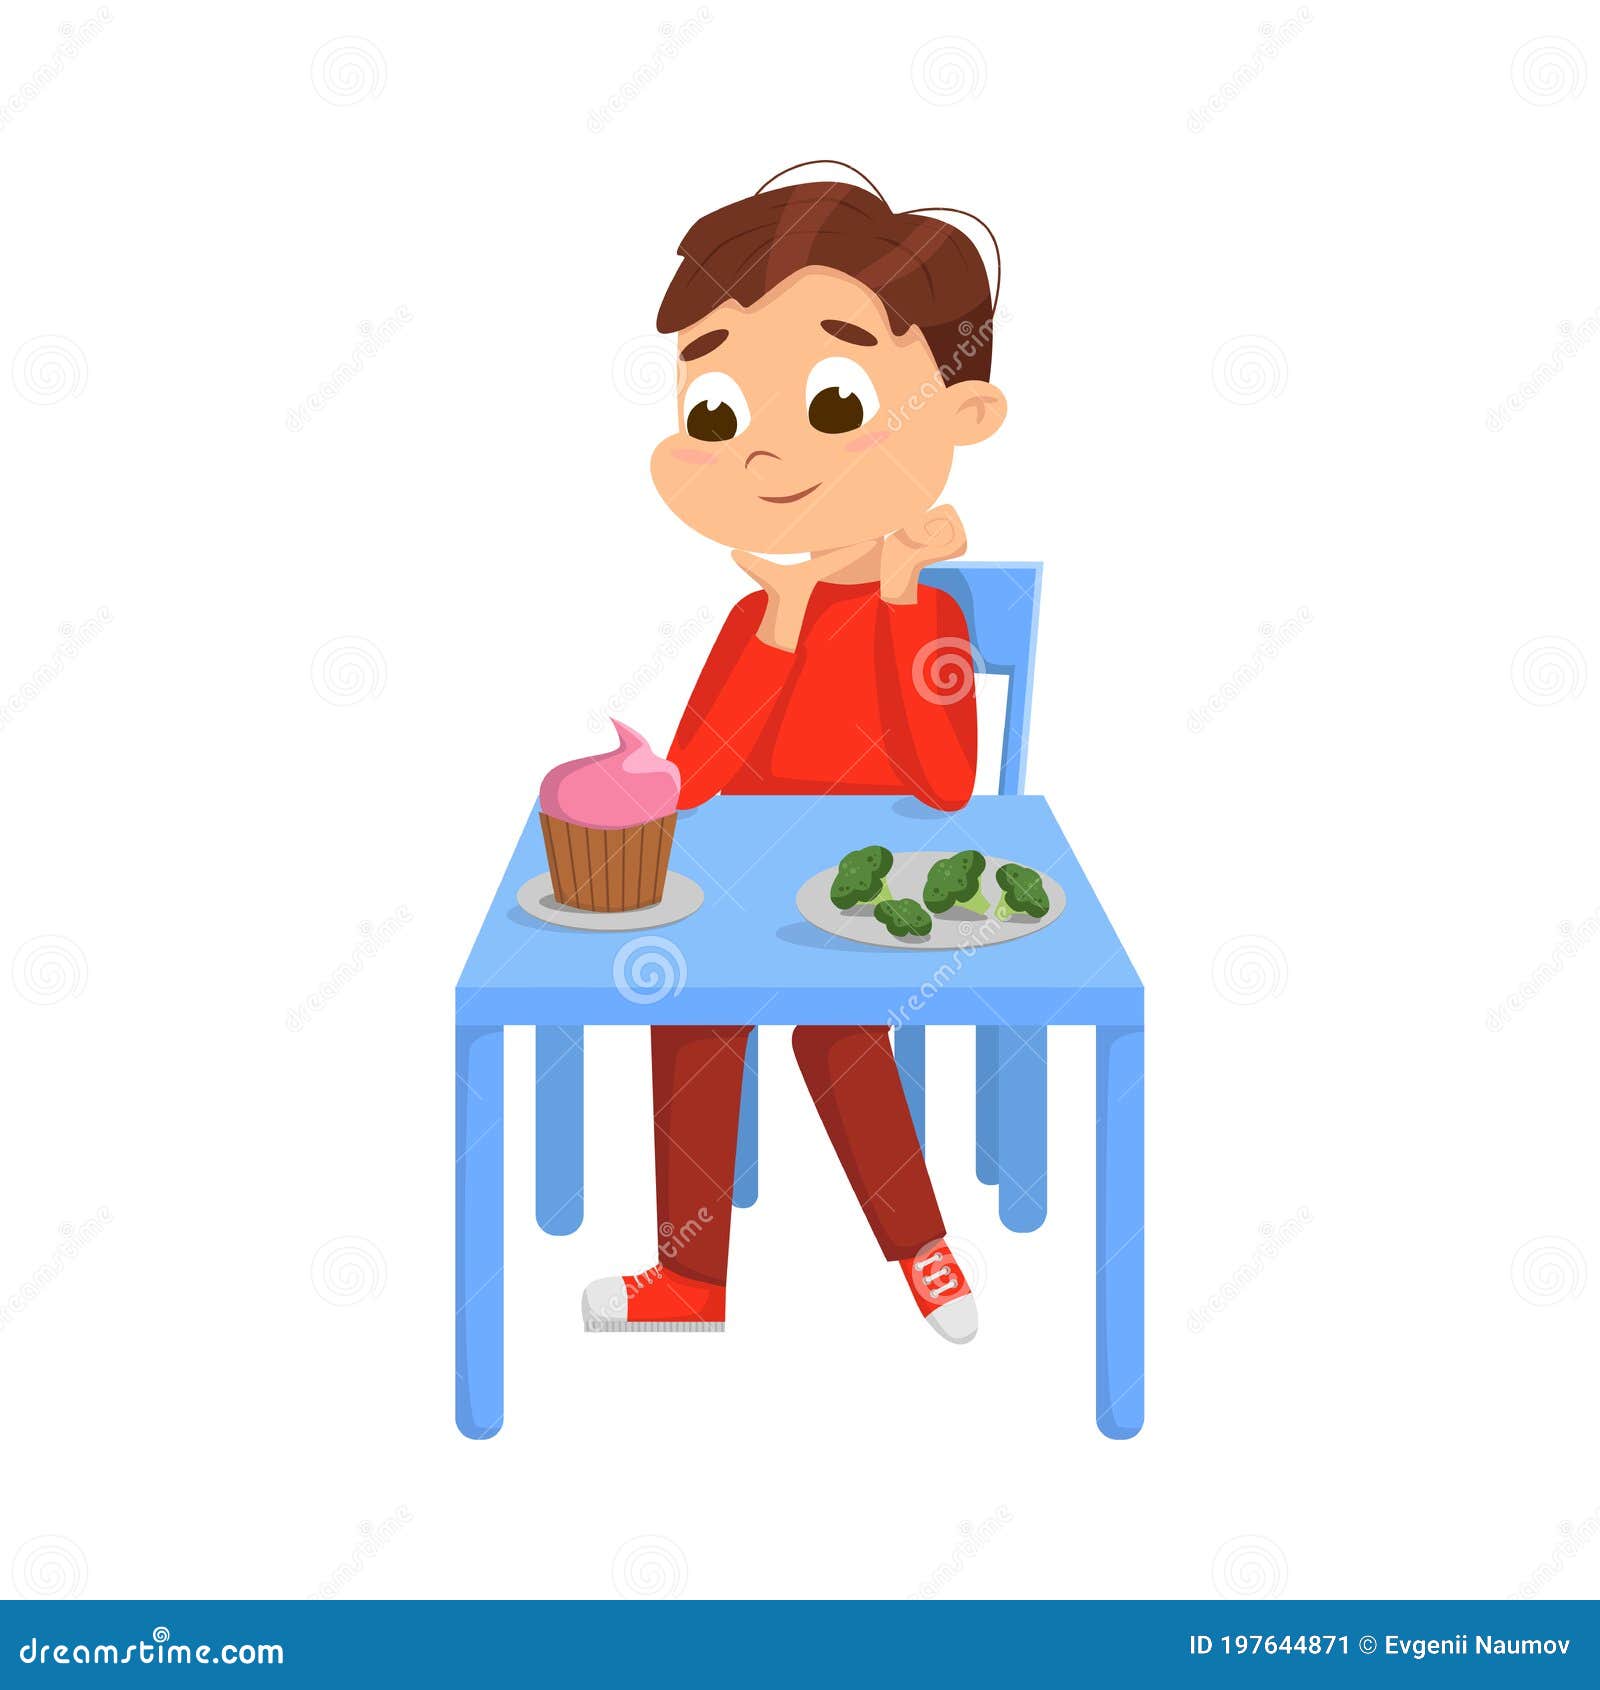 Cute Boy Sitting at Table and Eating, Kid Choosing between Healthy and  Unhealthy Food Cartoon Style Vector Illustration Stock Vector -  Illustration of healthy, cake: 197644871